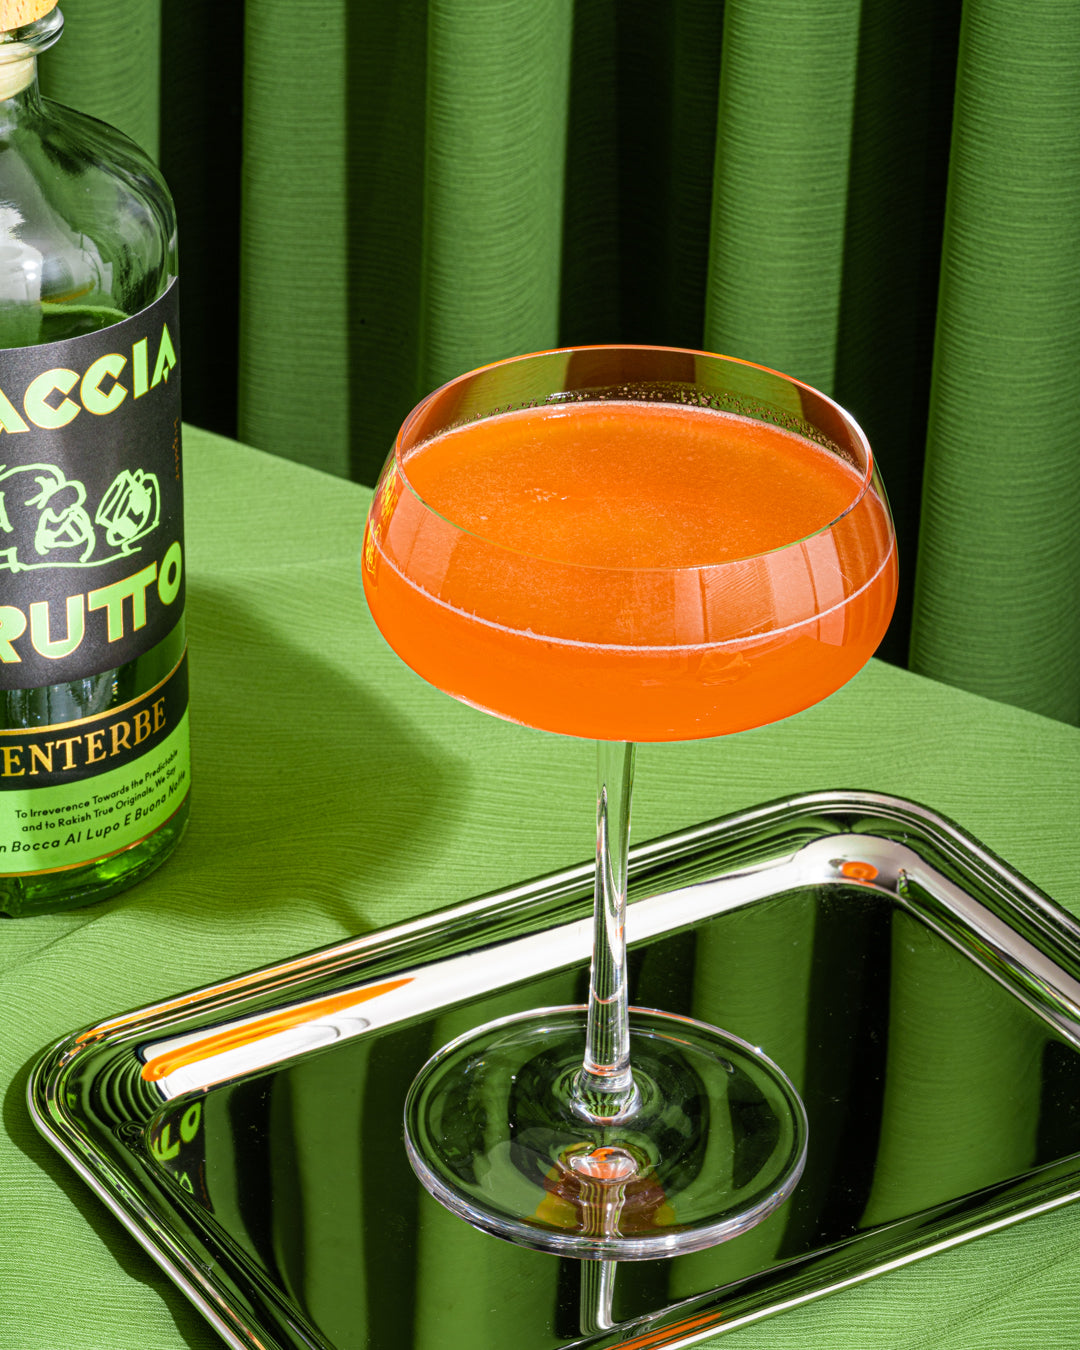 Bright orange cocktail on shiny silver tray with bottle of Faccia Brutto Centerbe in front of green curtain